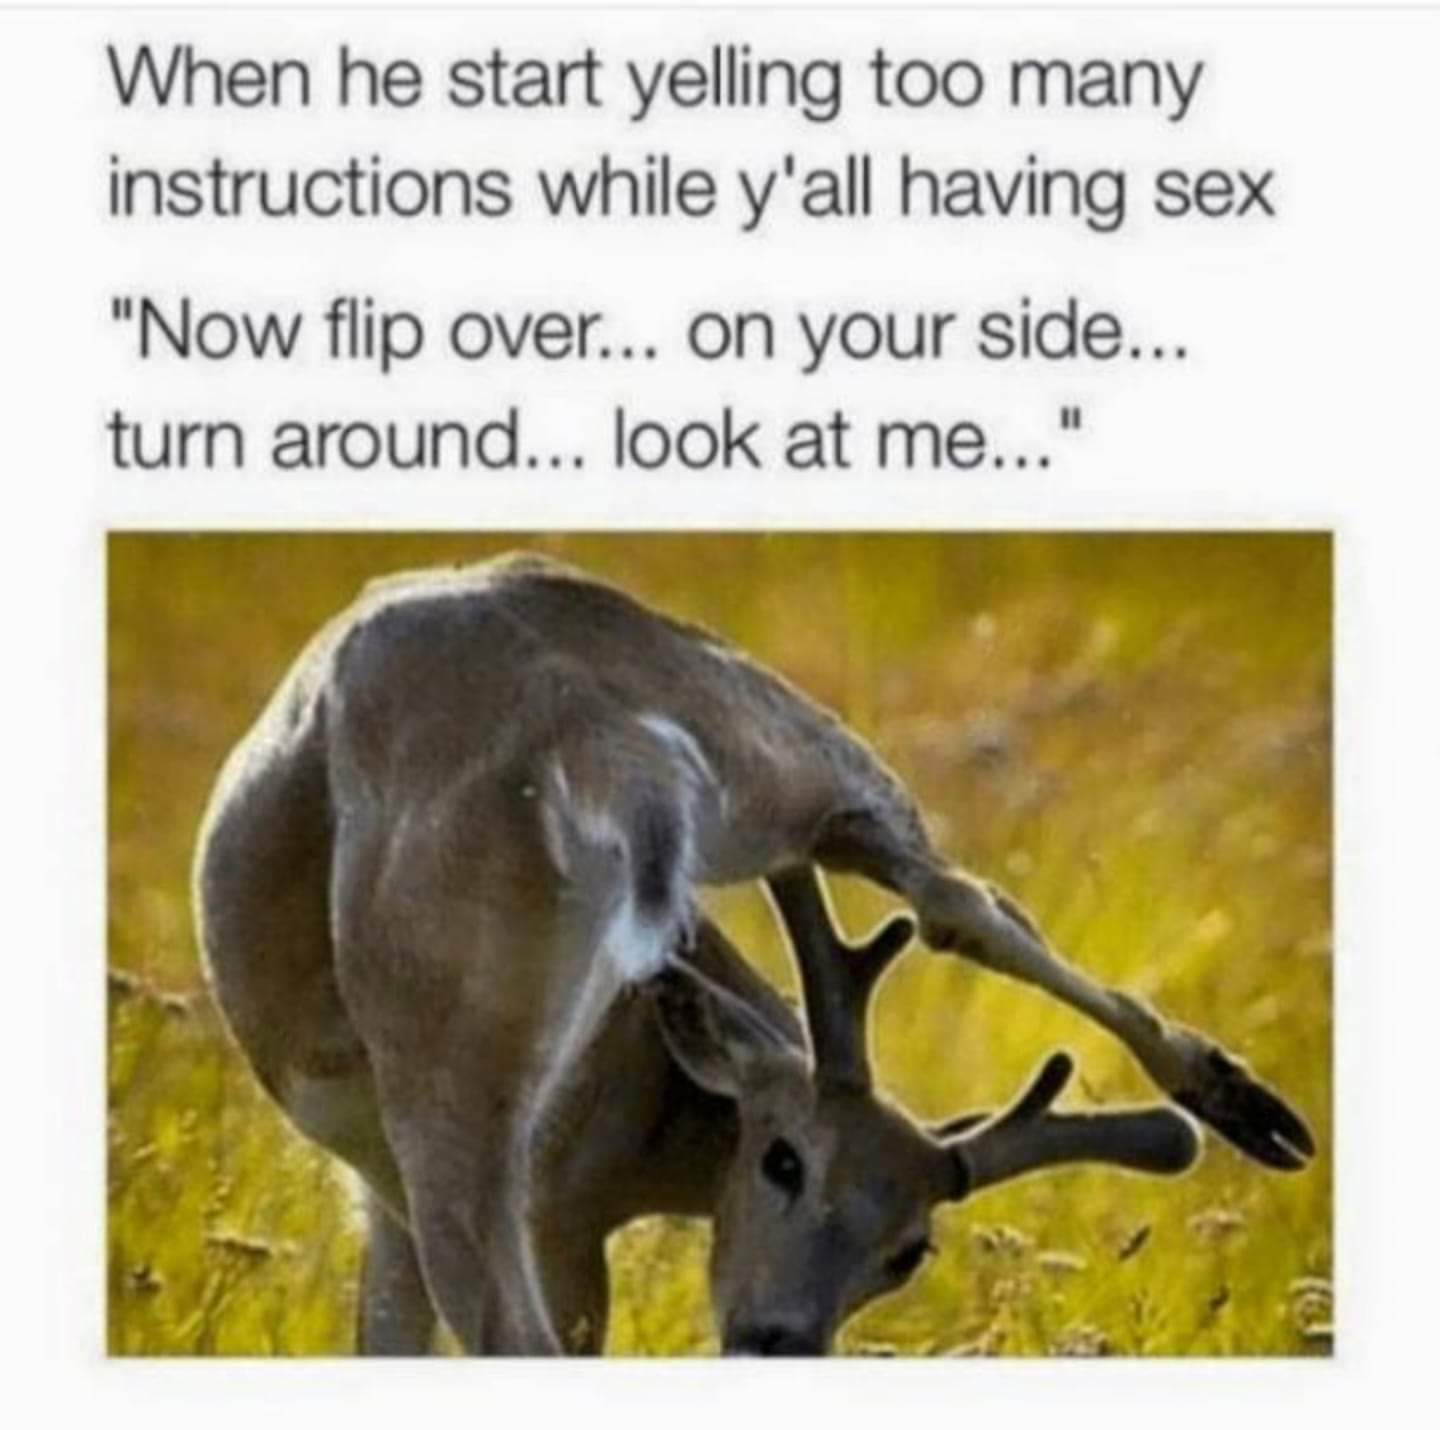 dirty and nsfw memes - funny sex memes - When he start yelling too many instructions while y'all having sex "Now flip over... on your side... turn around... look at me..."